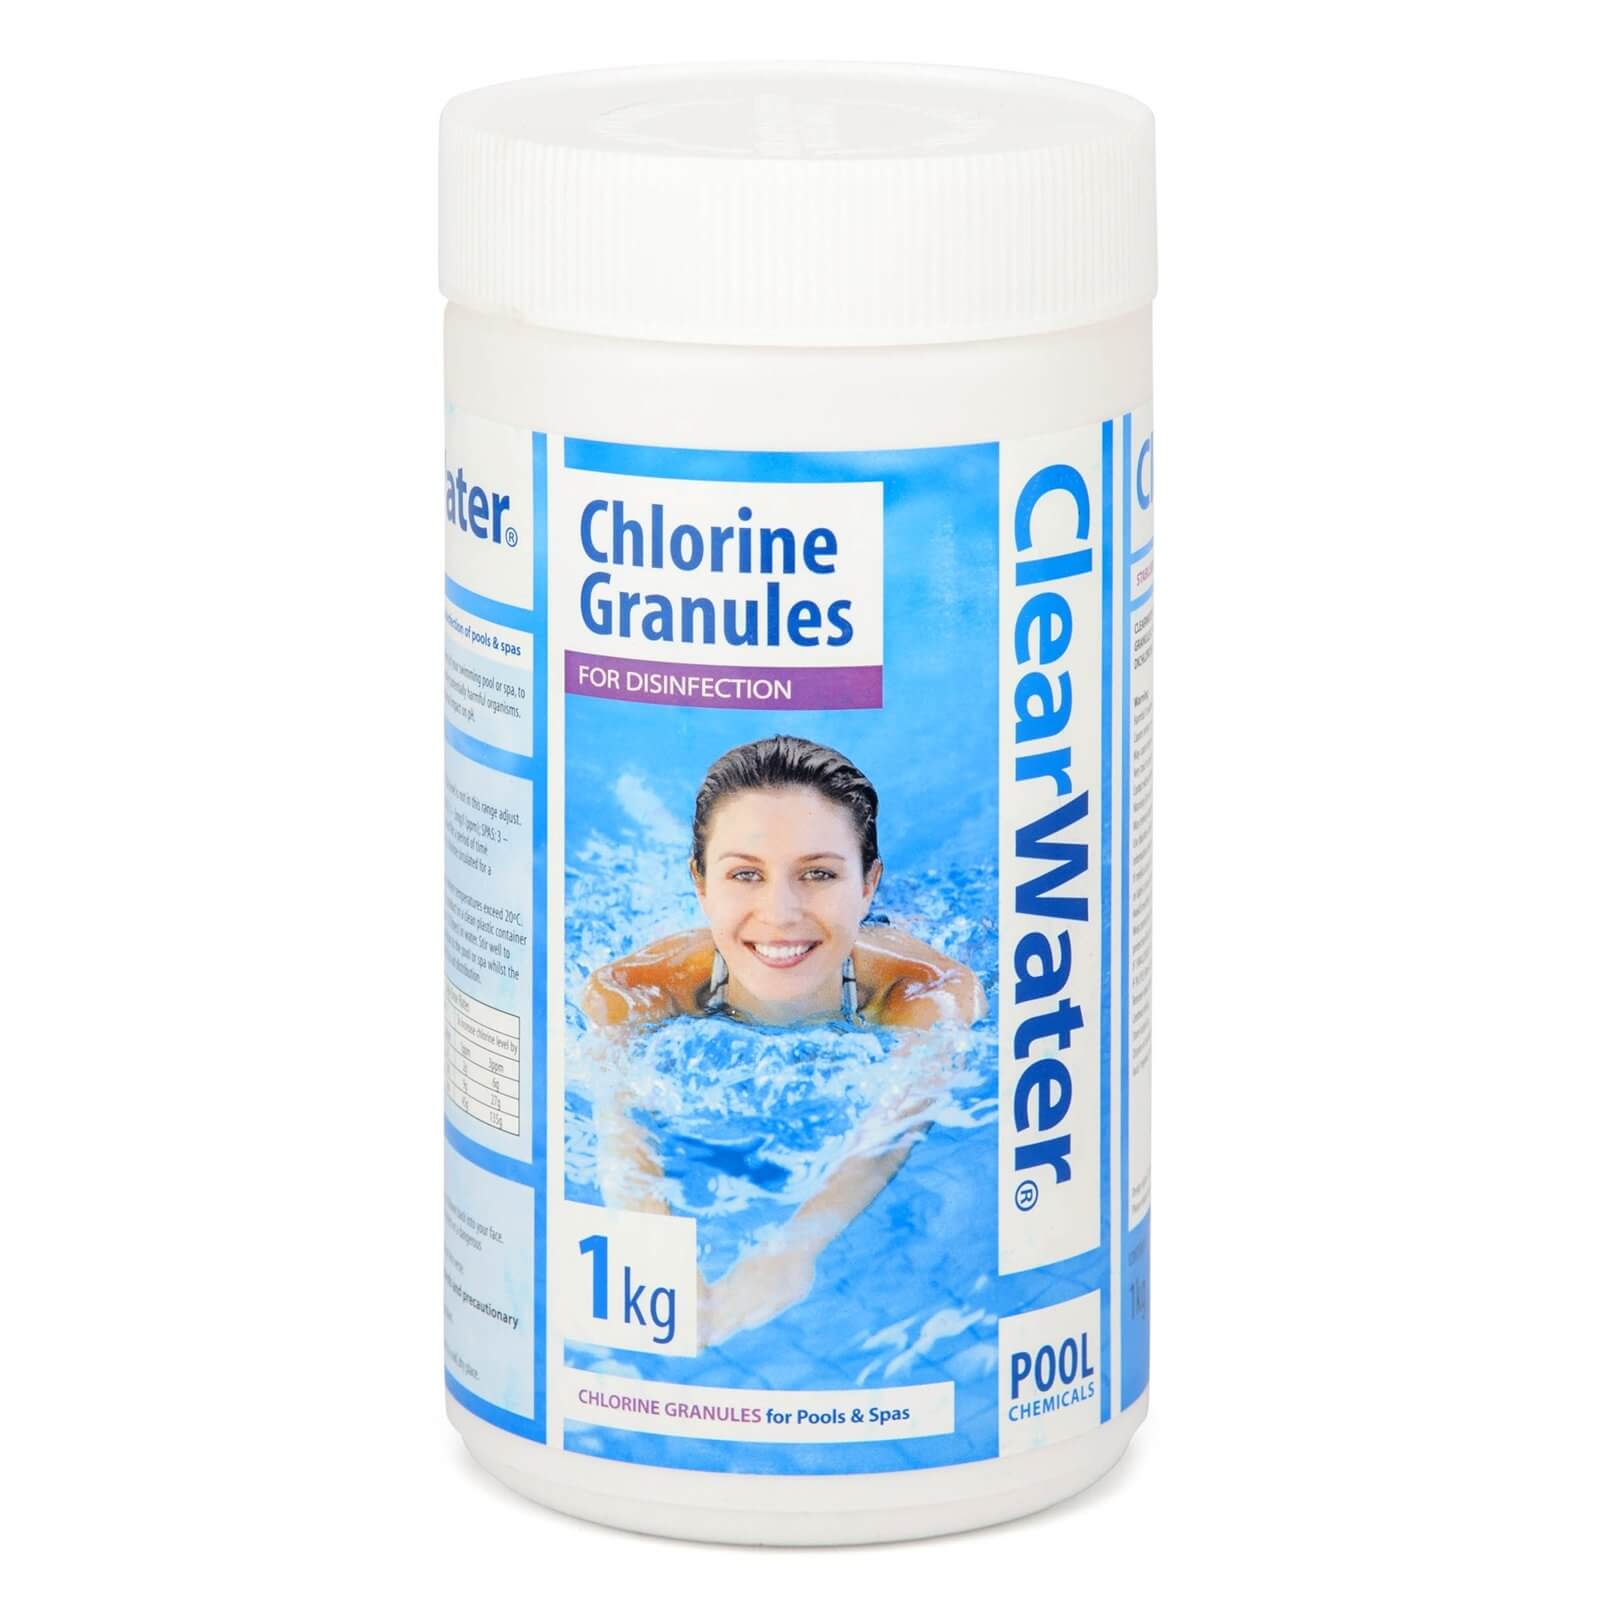 ClearWater Chlorine Granules - 1kg for Hot Tubs and Pools